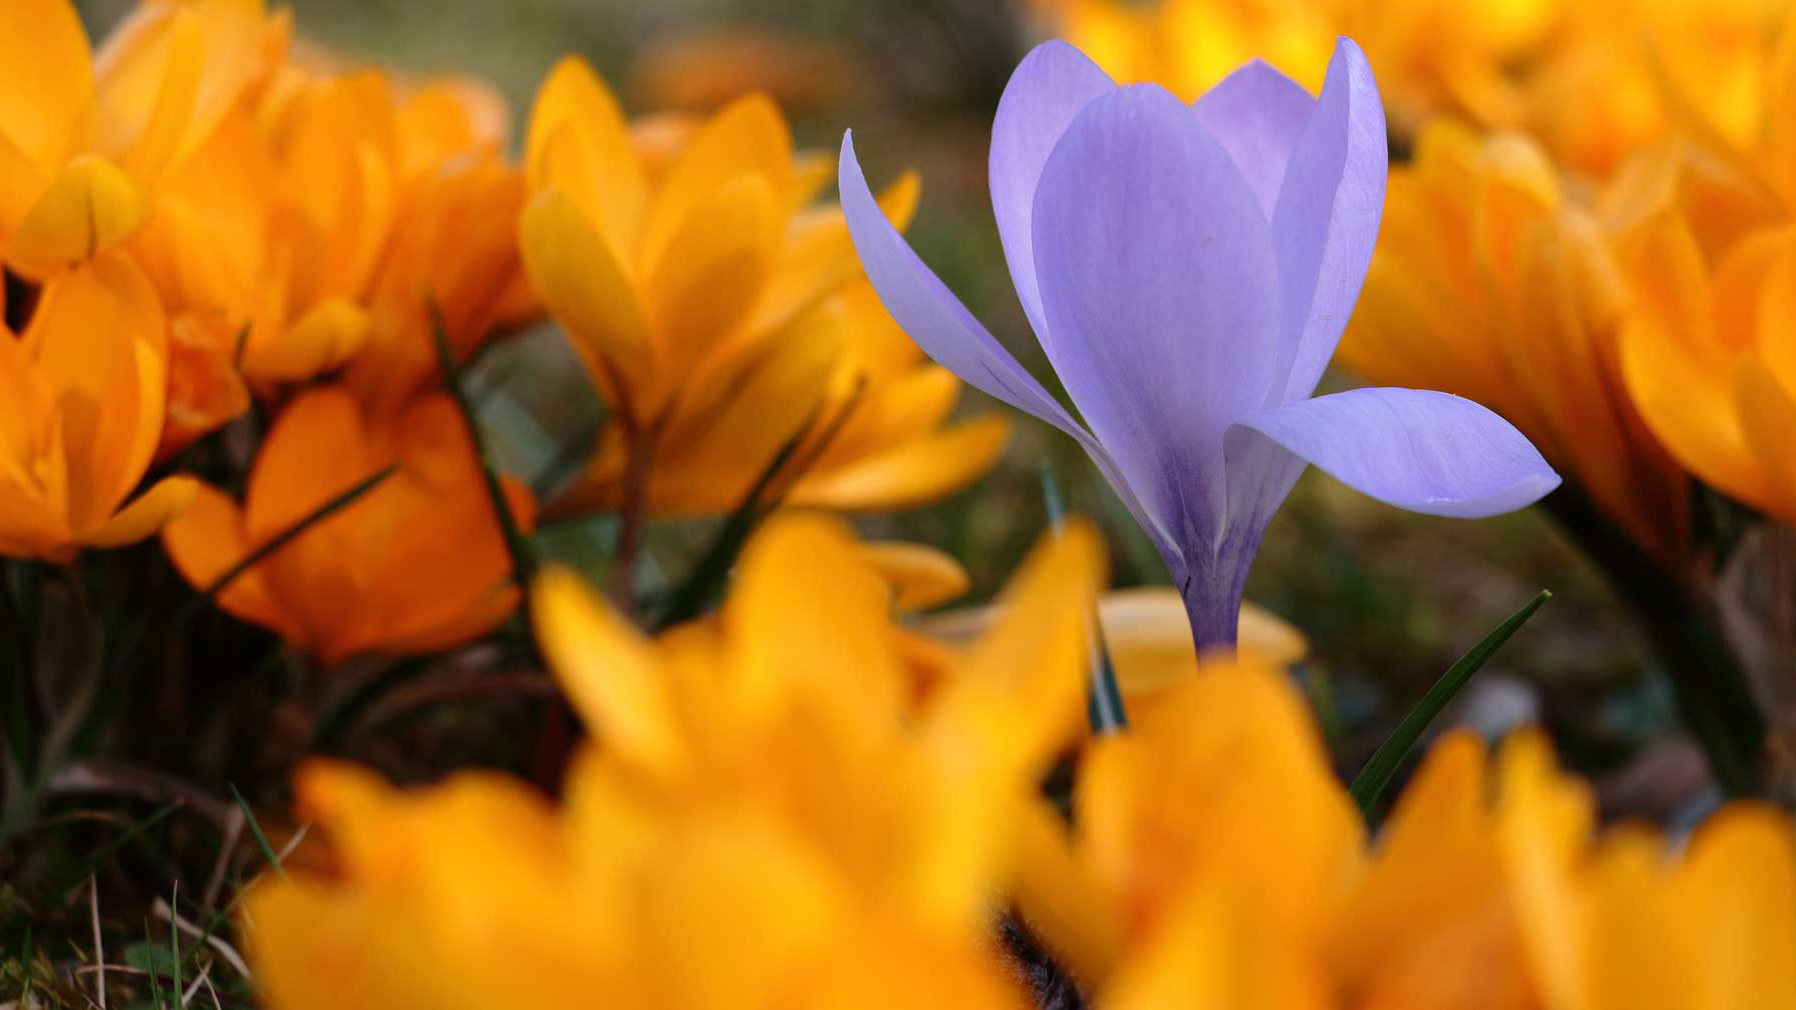 Purple flower with blurred orange flowers in background and foreground | SoulSpectives Institute